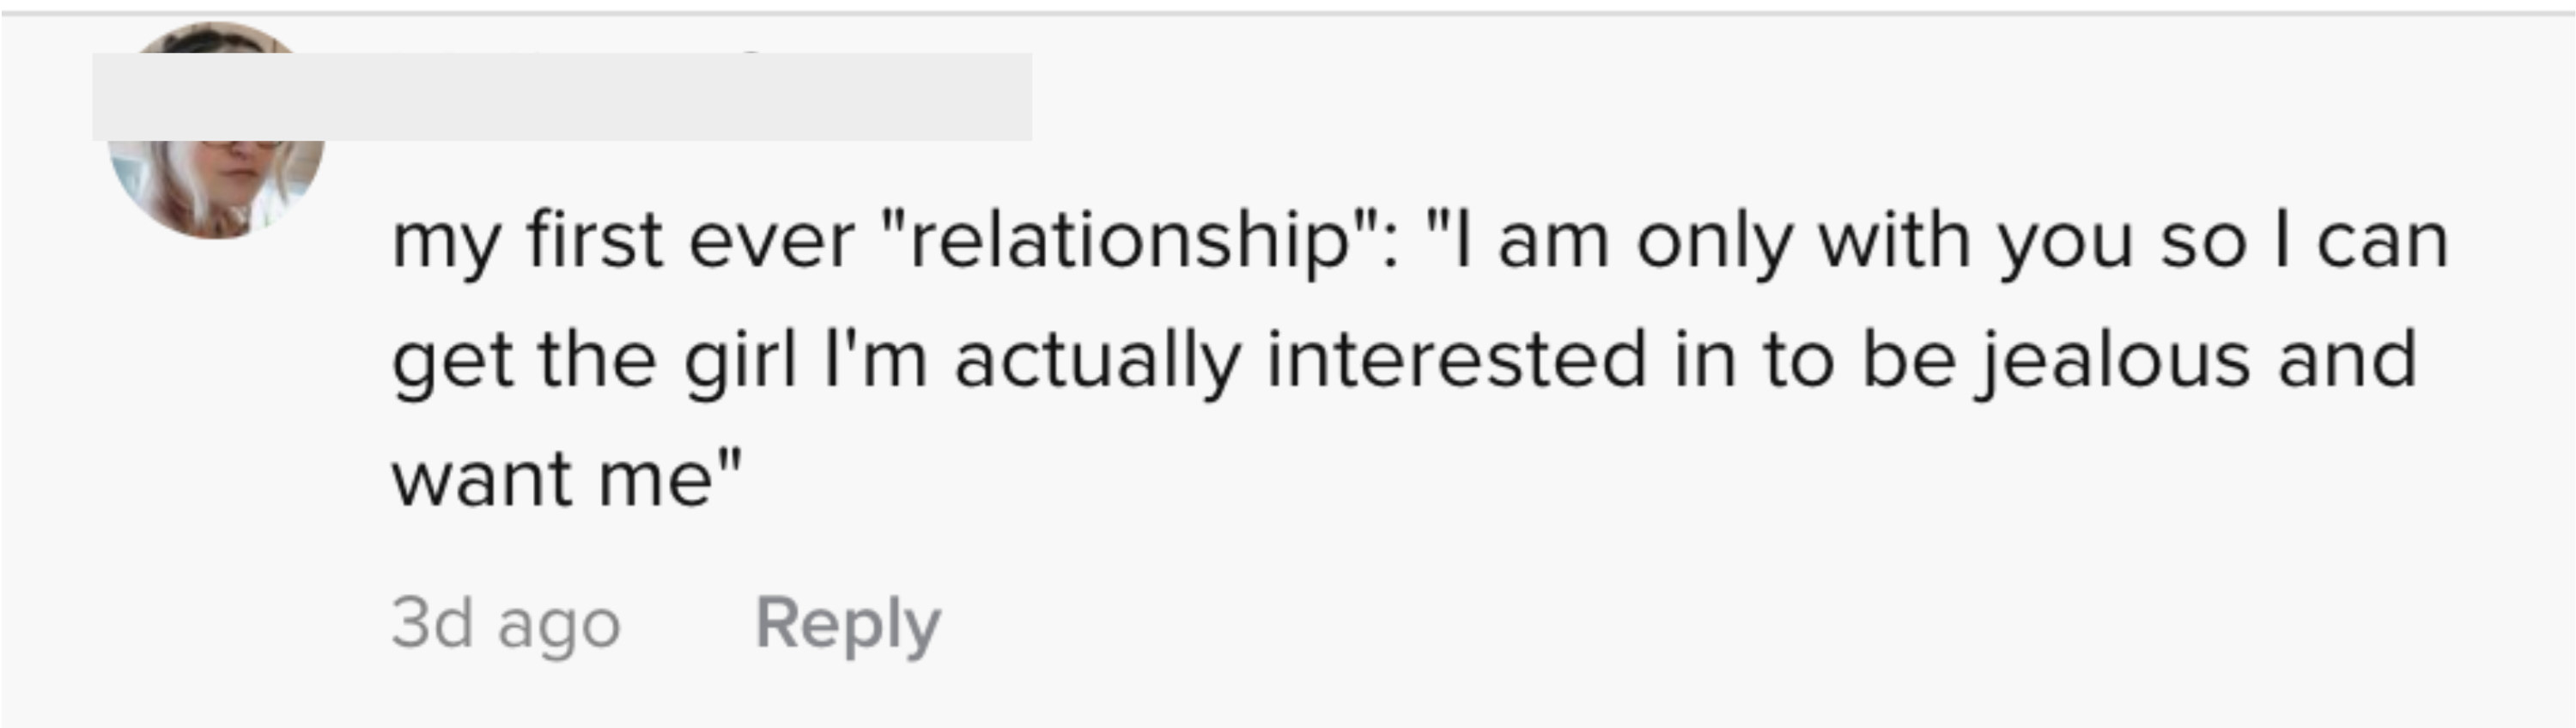 My first-ever relationship: &quot;I&#x27;m only with you so I can get the girl I&#x27;m actually interested in to be jealous and want me&quot;